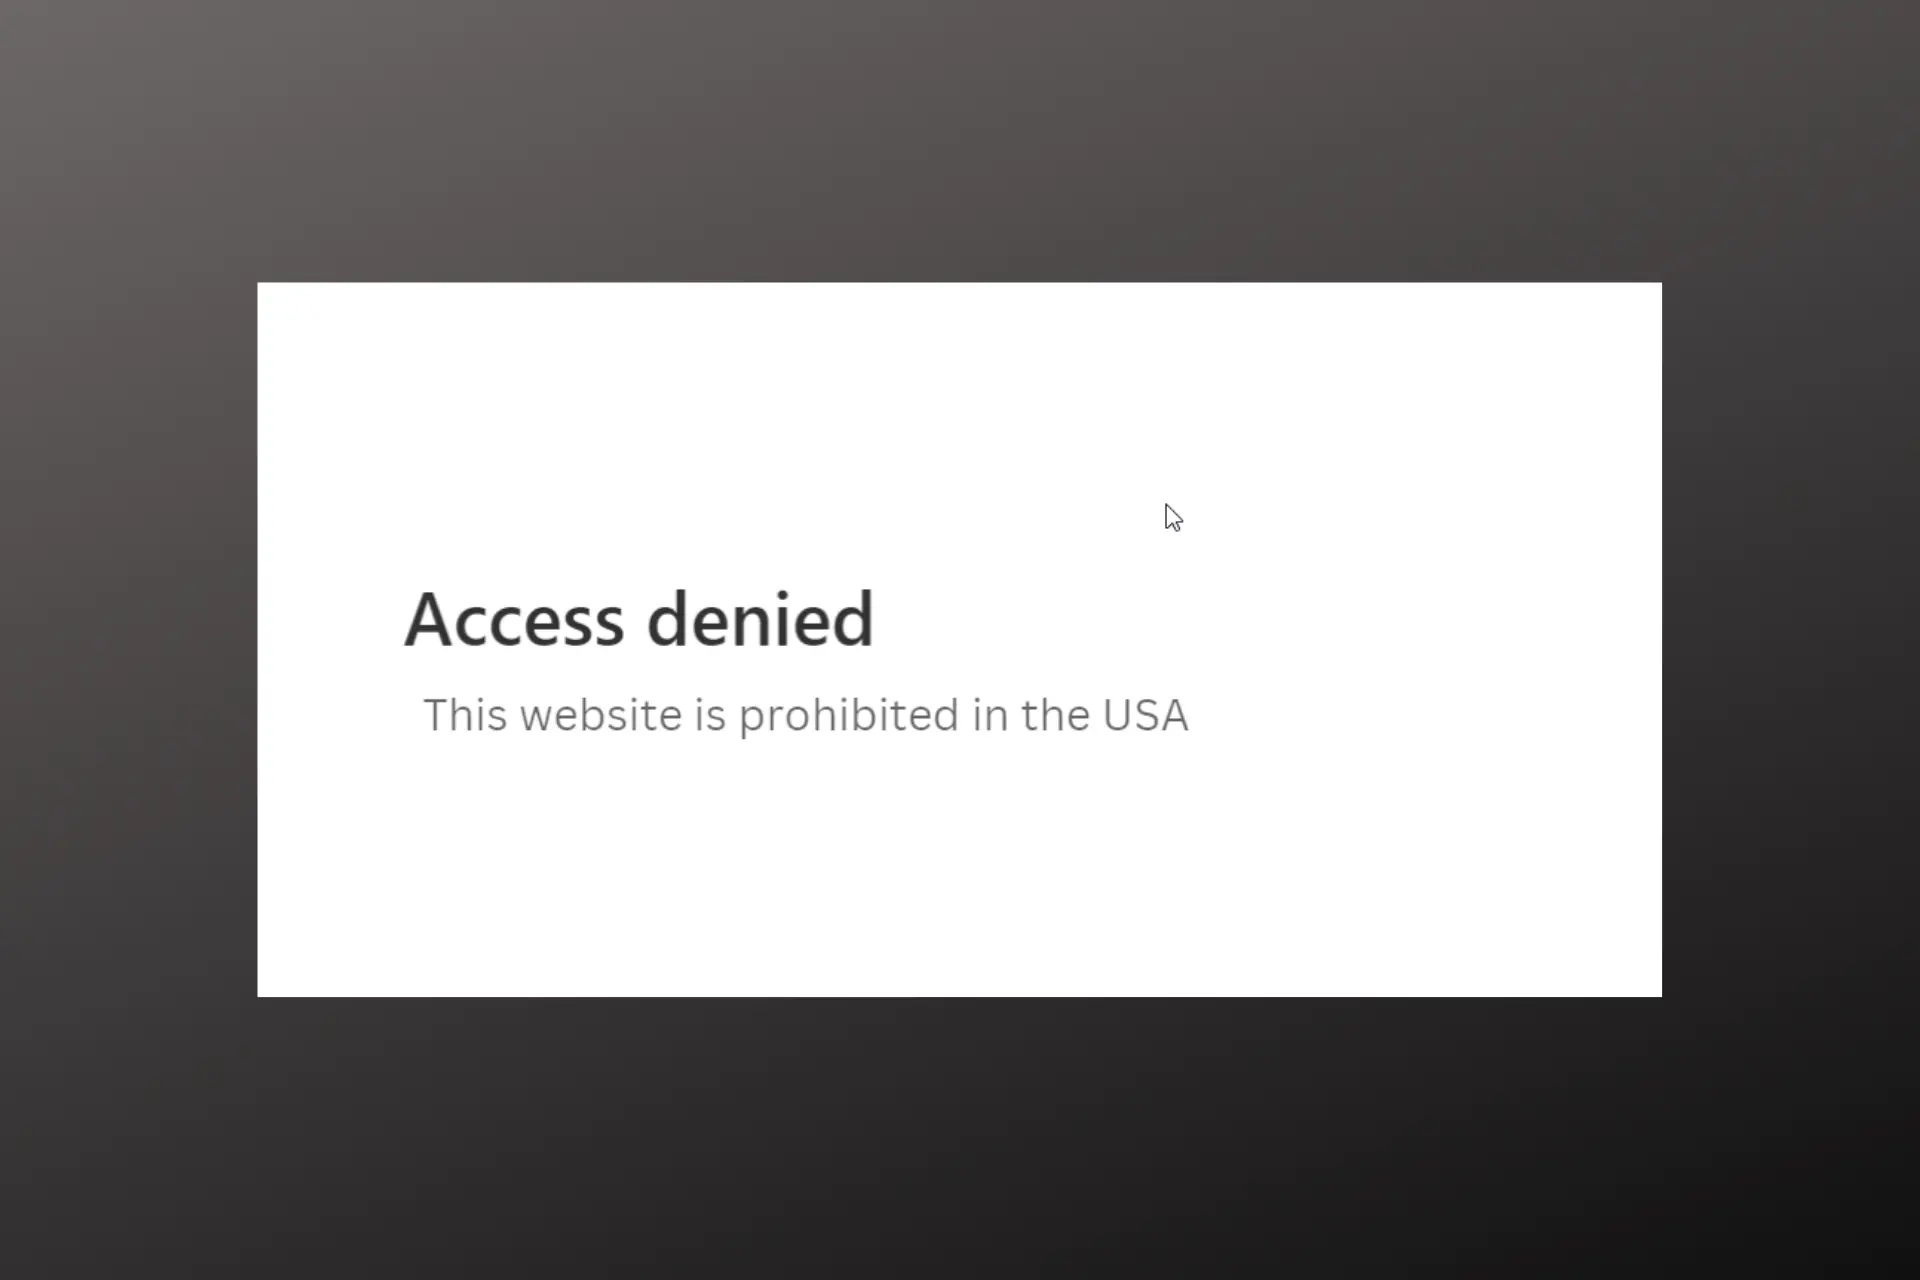 this website is prohibited in usa